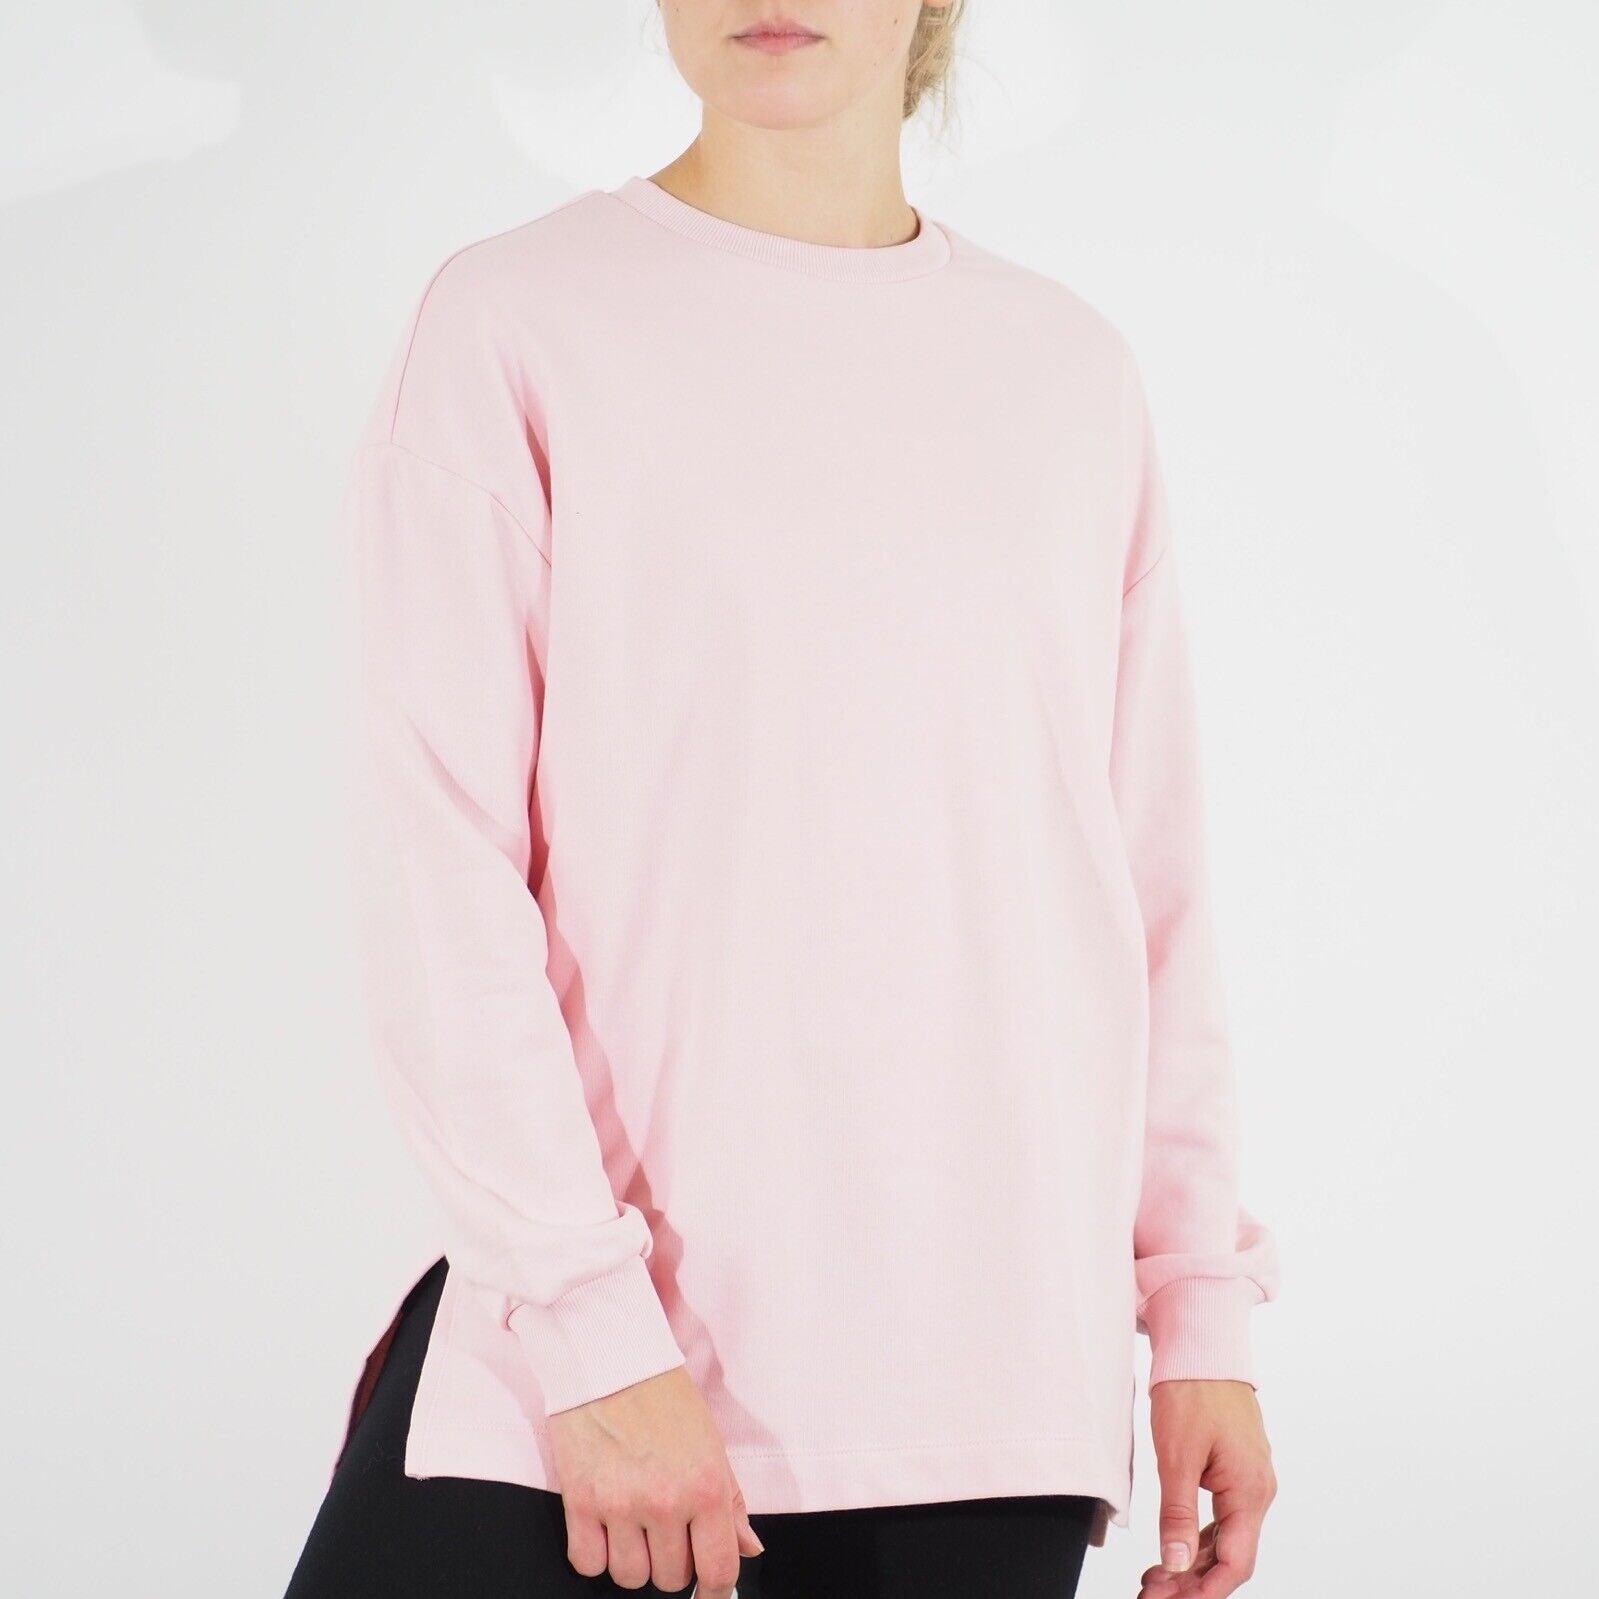 Womens Ex M&S Long Sleeve Top Pink Round Neck Casual Ladies Cotton Jumper